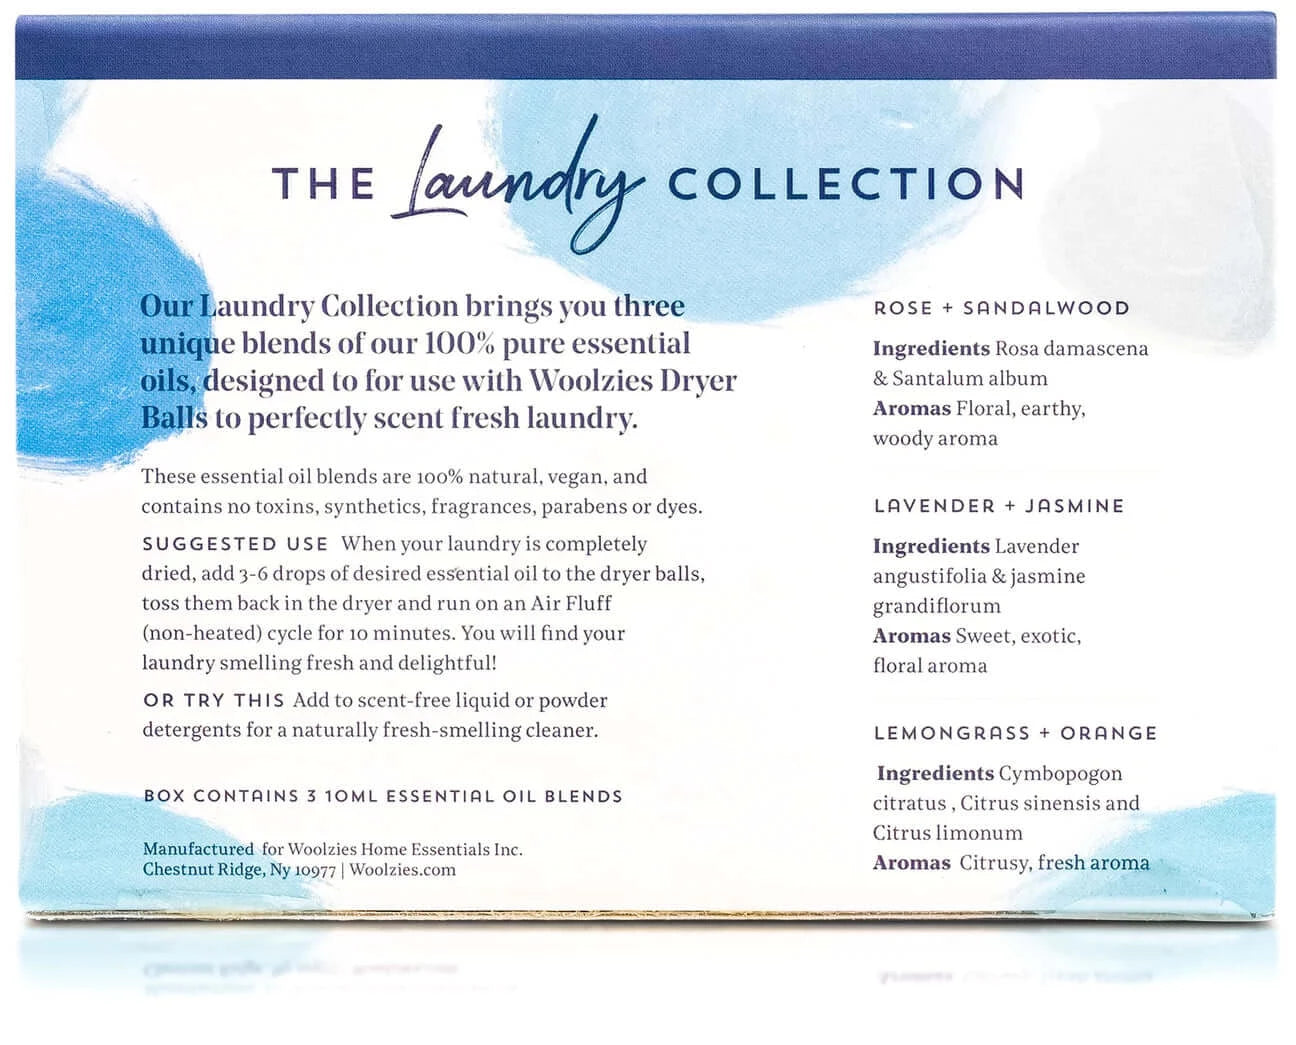 Woolzies Laundry Essential Oil Collection